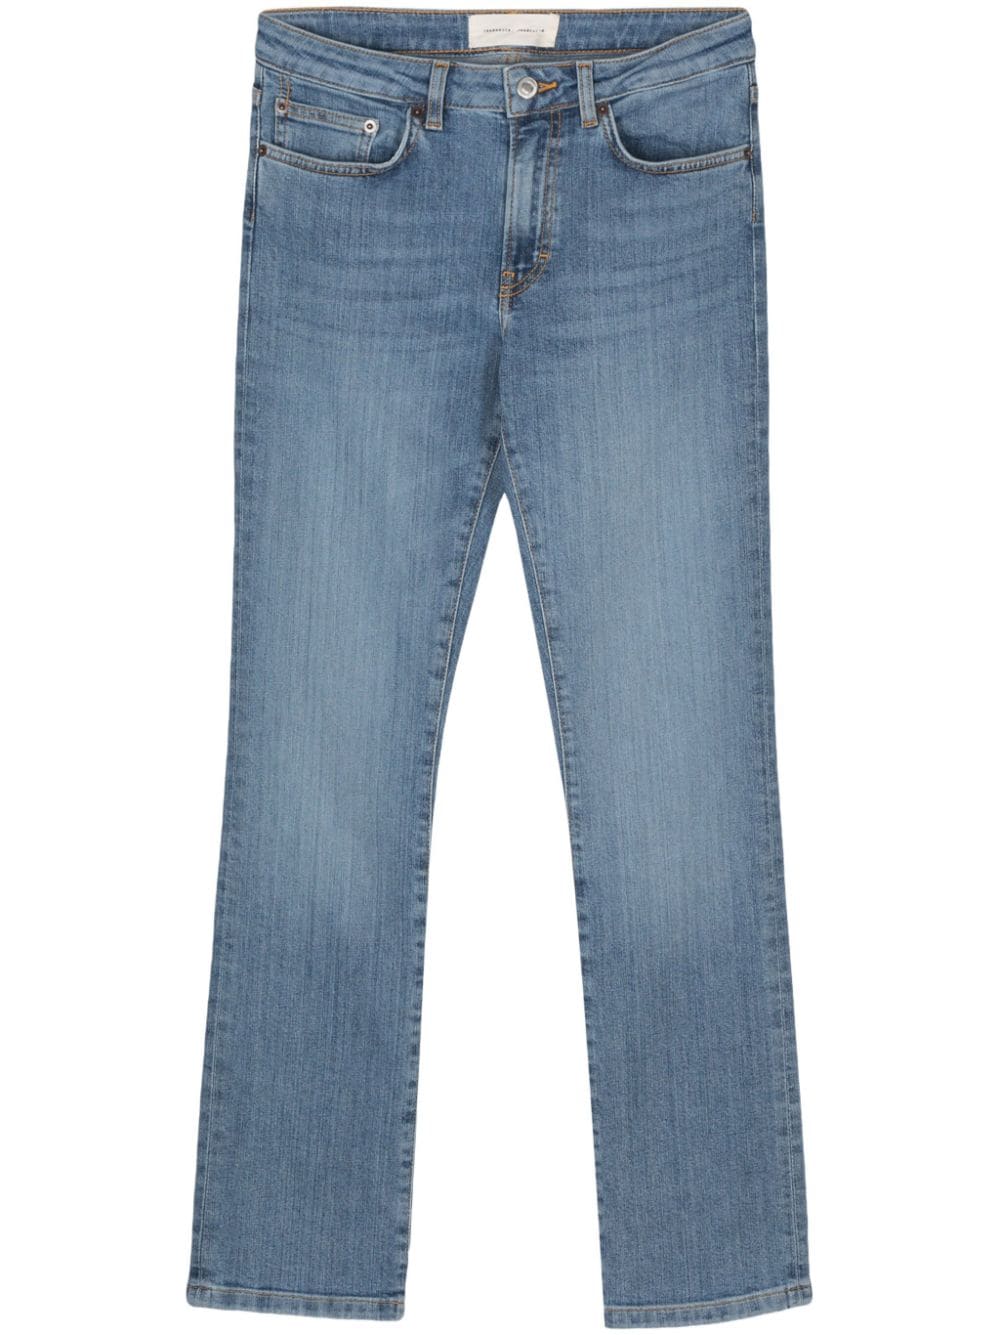 Jeanerica Hydra mid-rise slim-fit jeans - Blue von Jeanerica